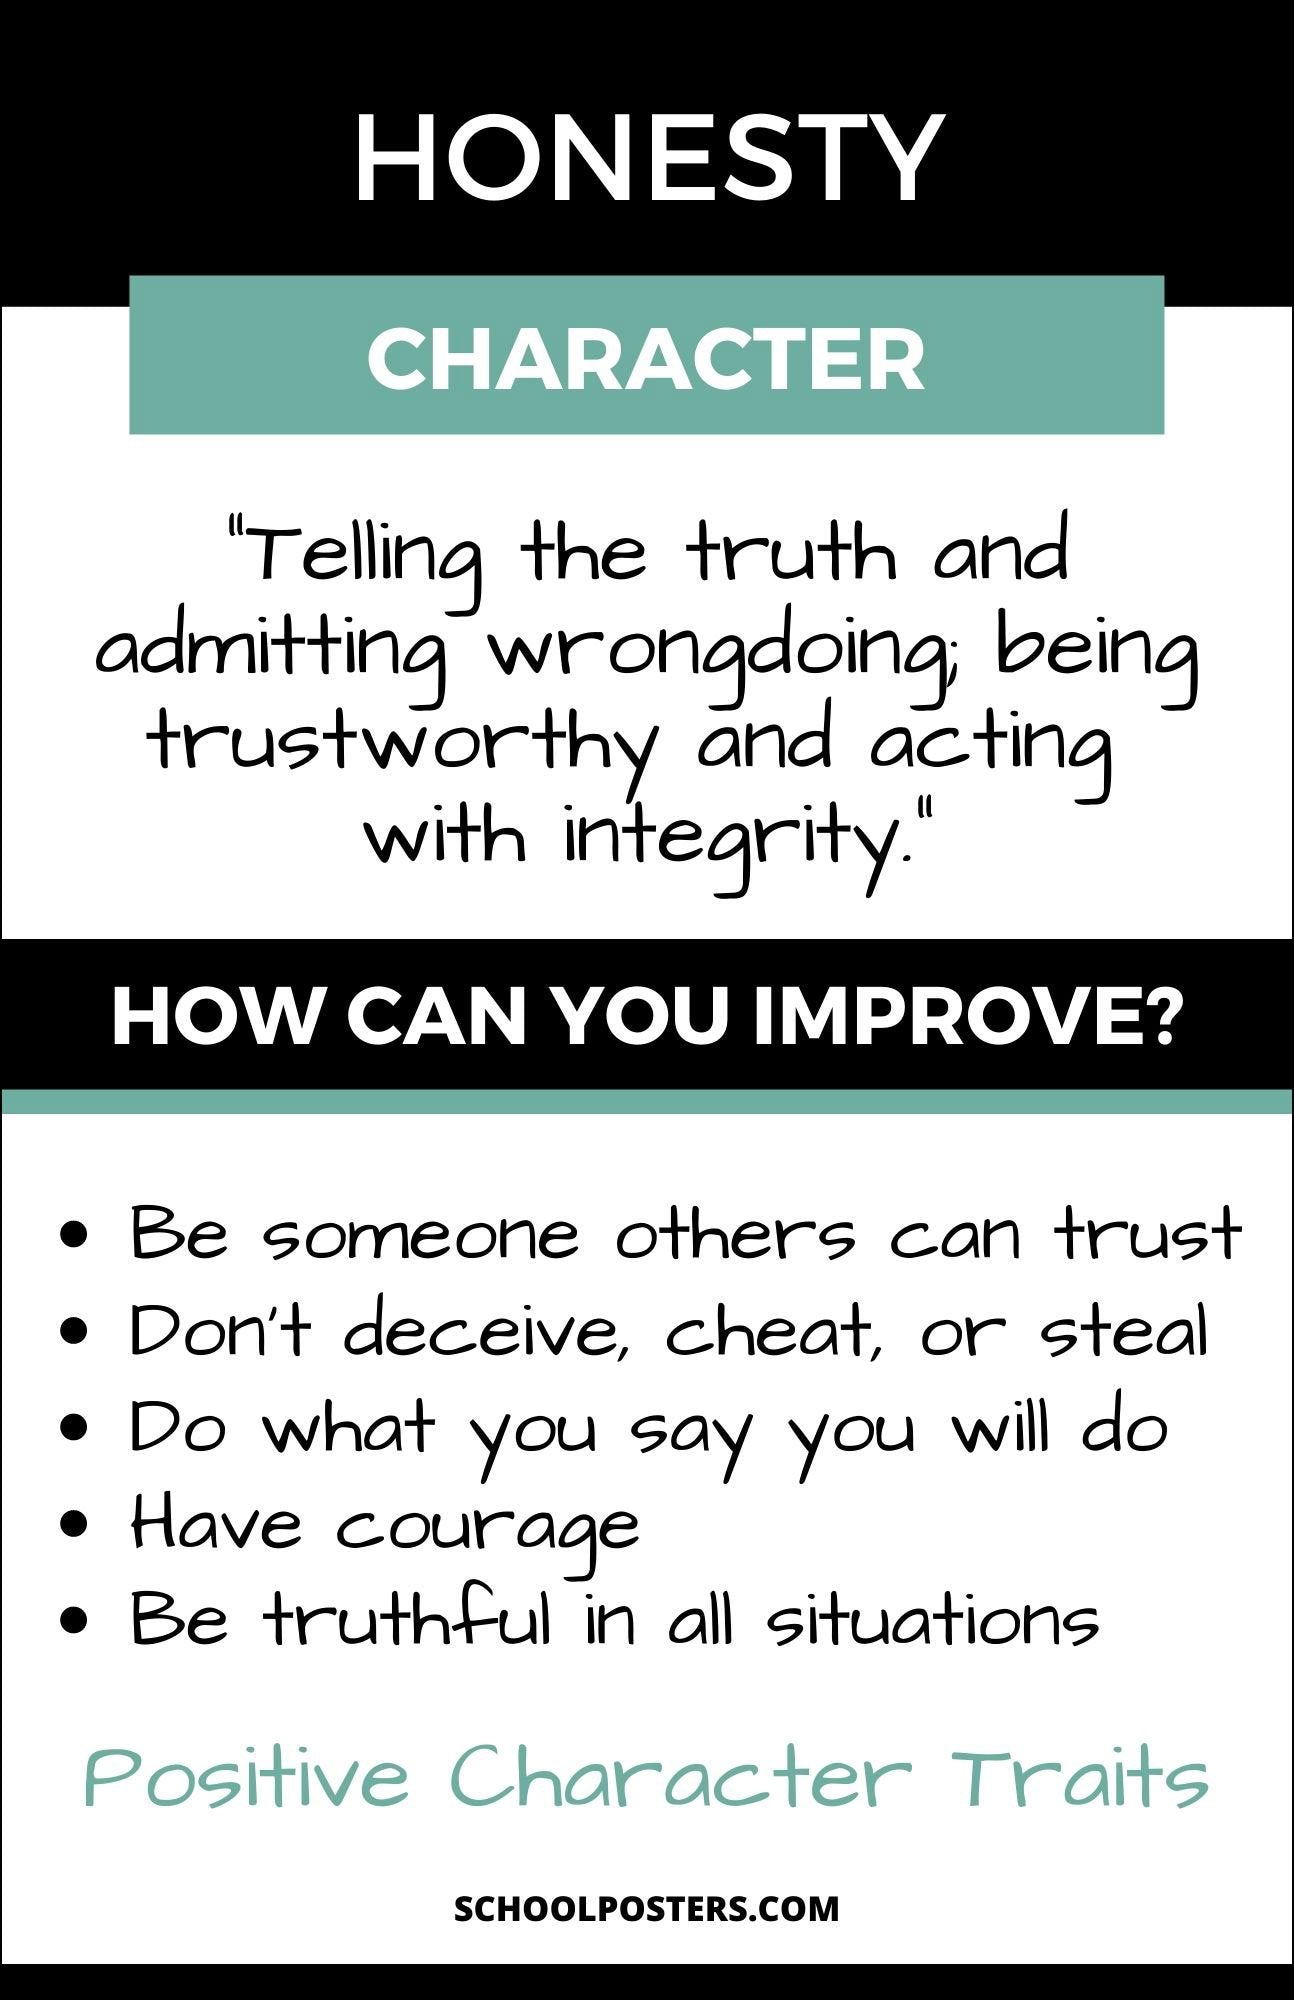 Honesty Character Trait Poster